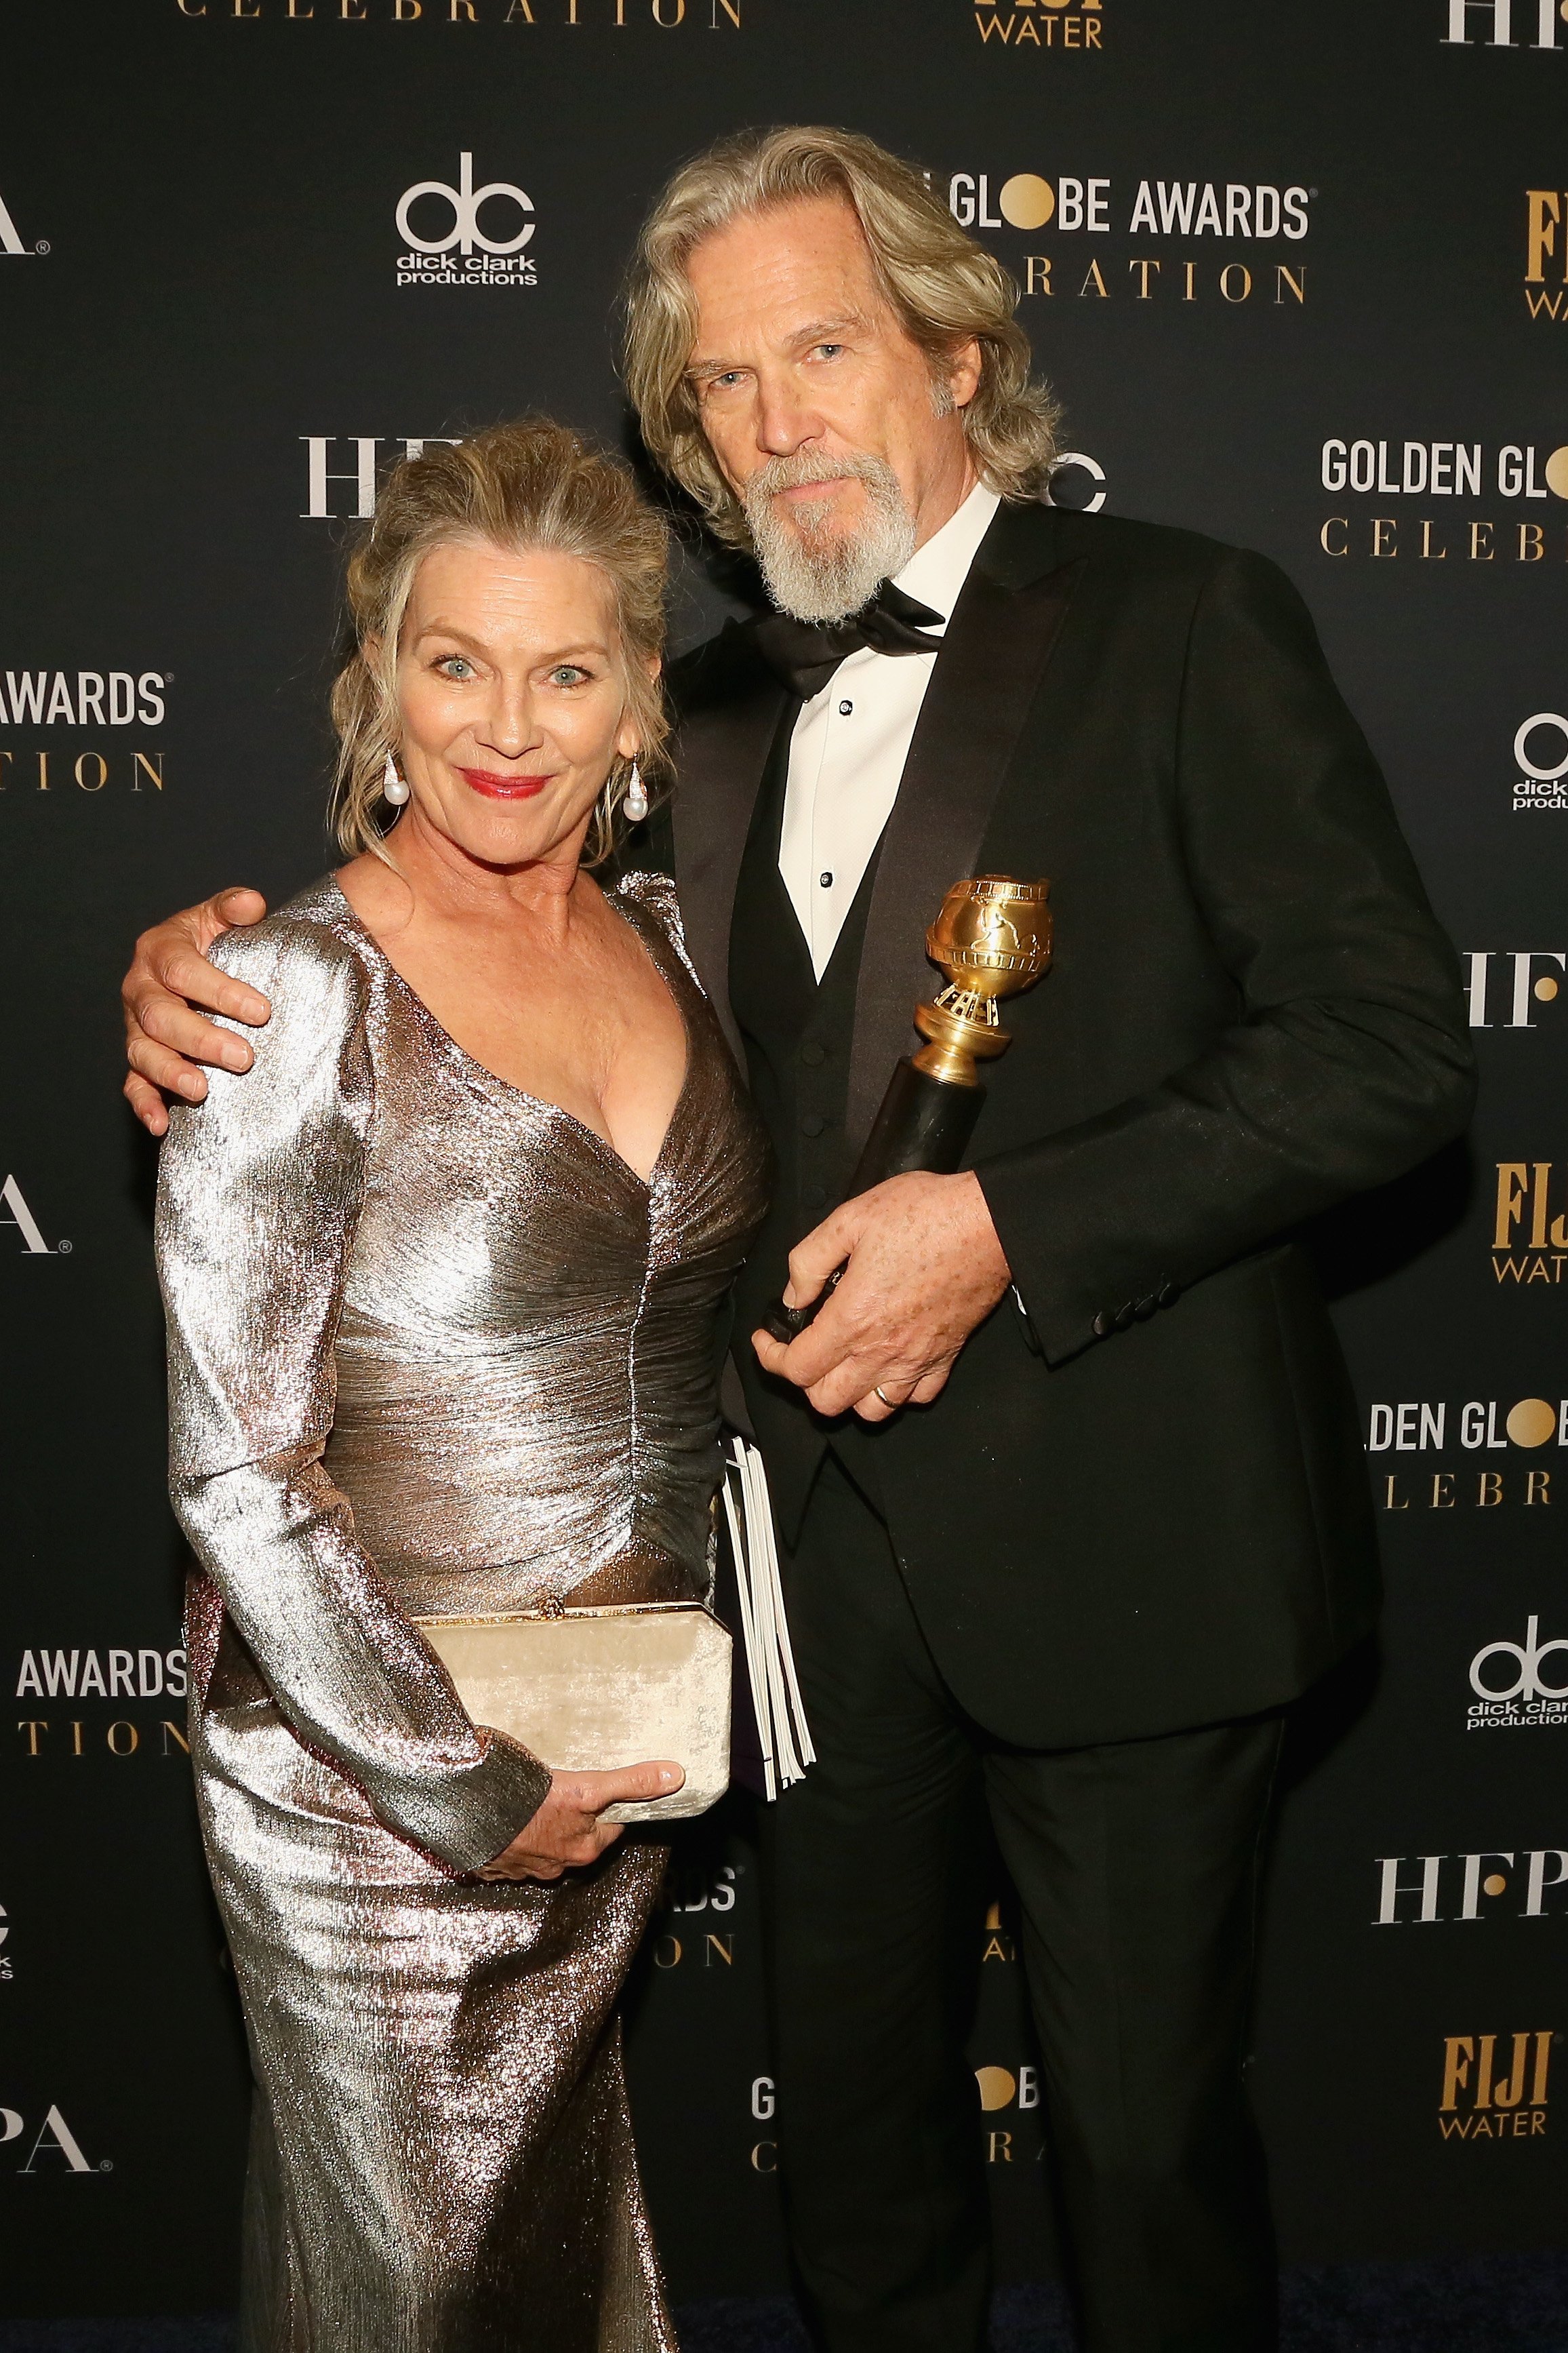 Actor Jeff Bridges atnd his wife Susan Bridges on January 6, 2019 in Los Angeles California | Source: Getty Images